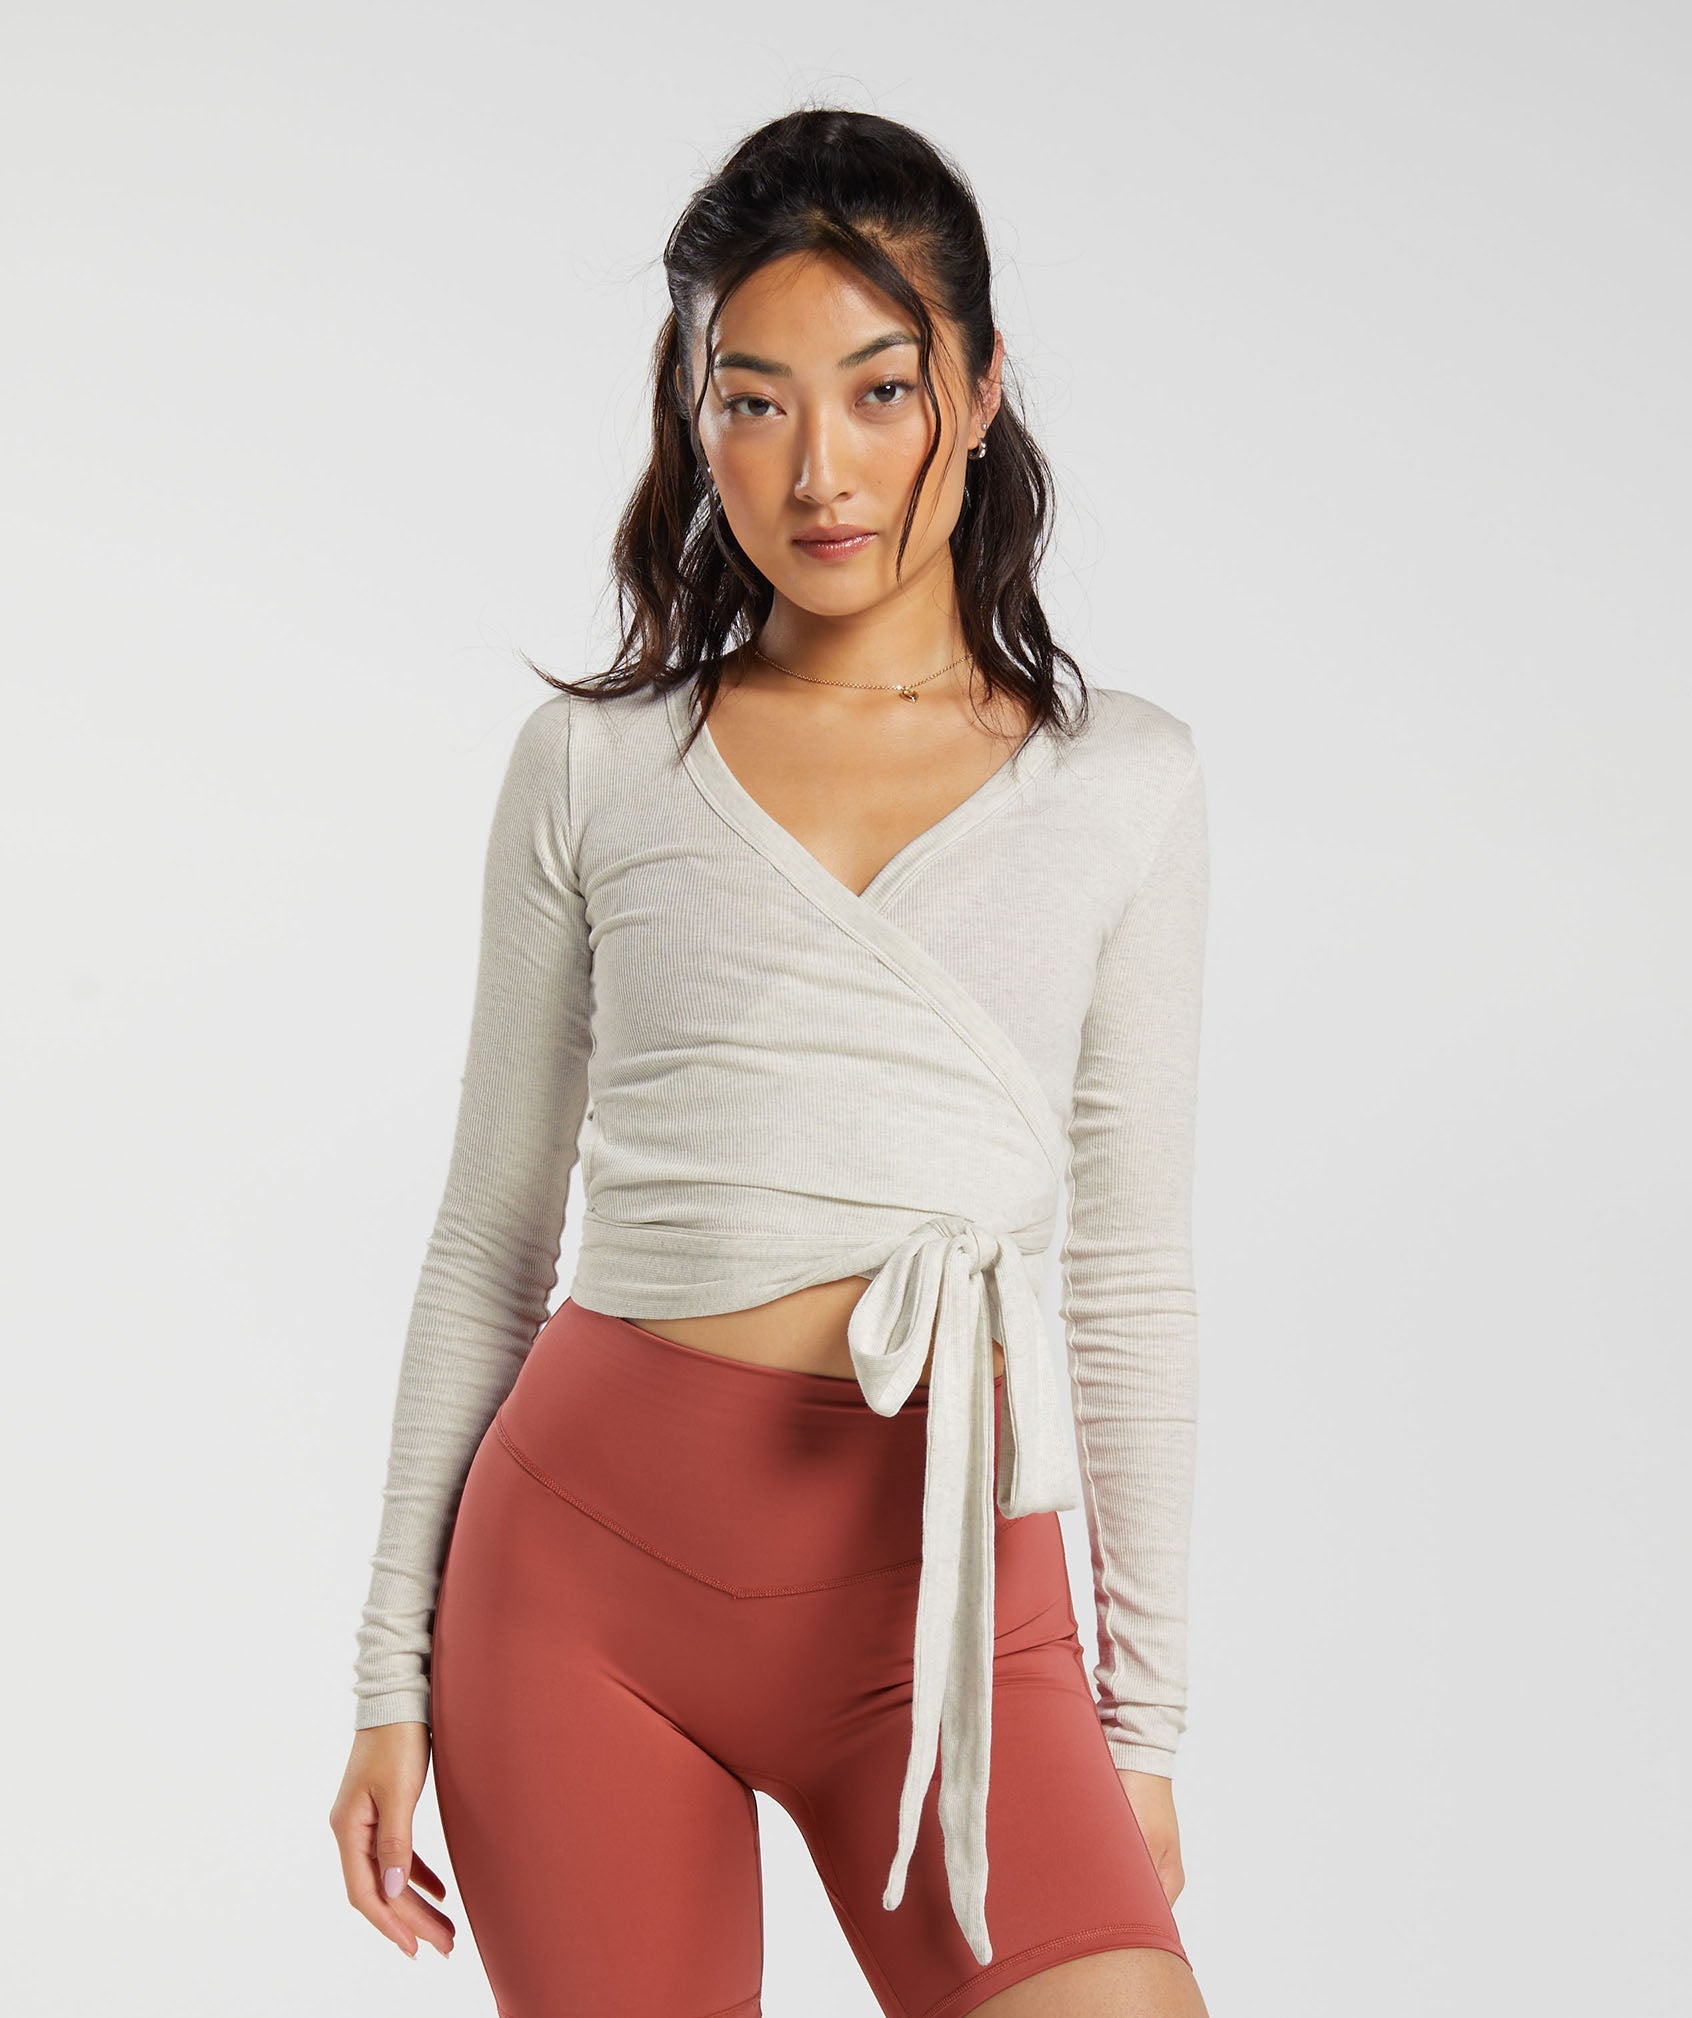 Elevate Wrap Long Sleeve Top in Frost White Marl - view 1